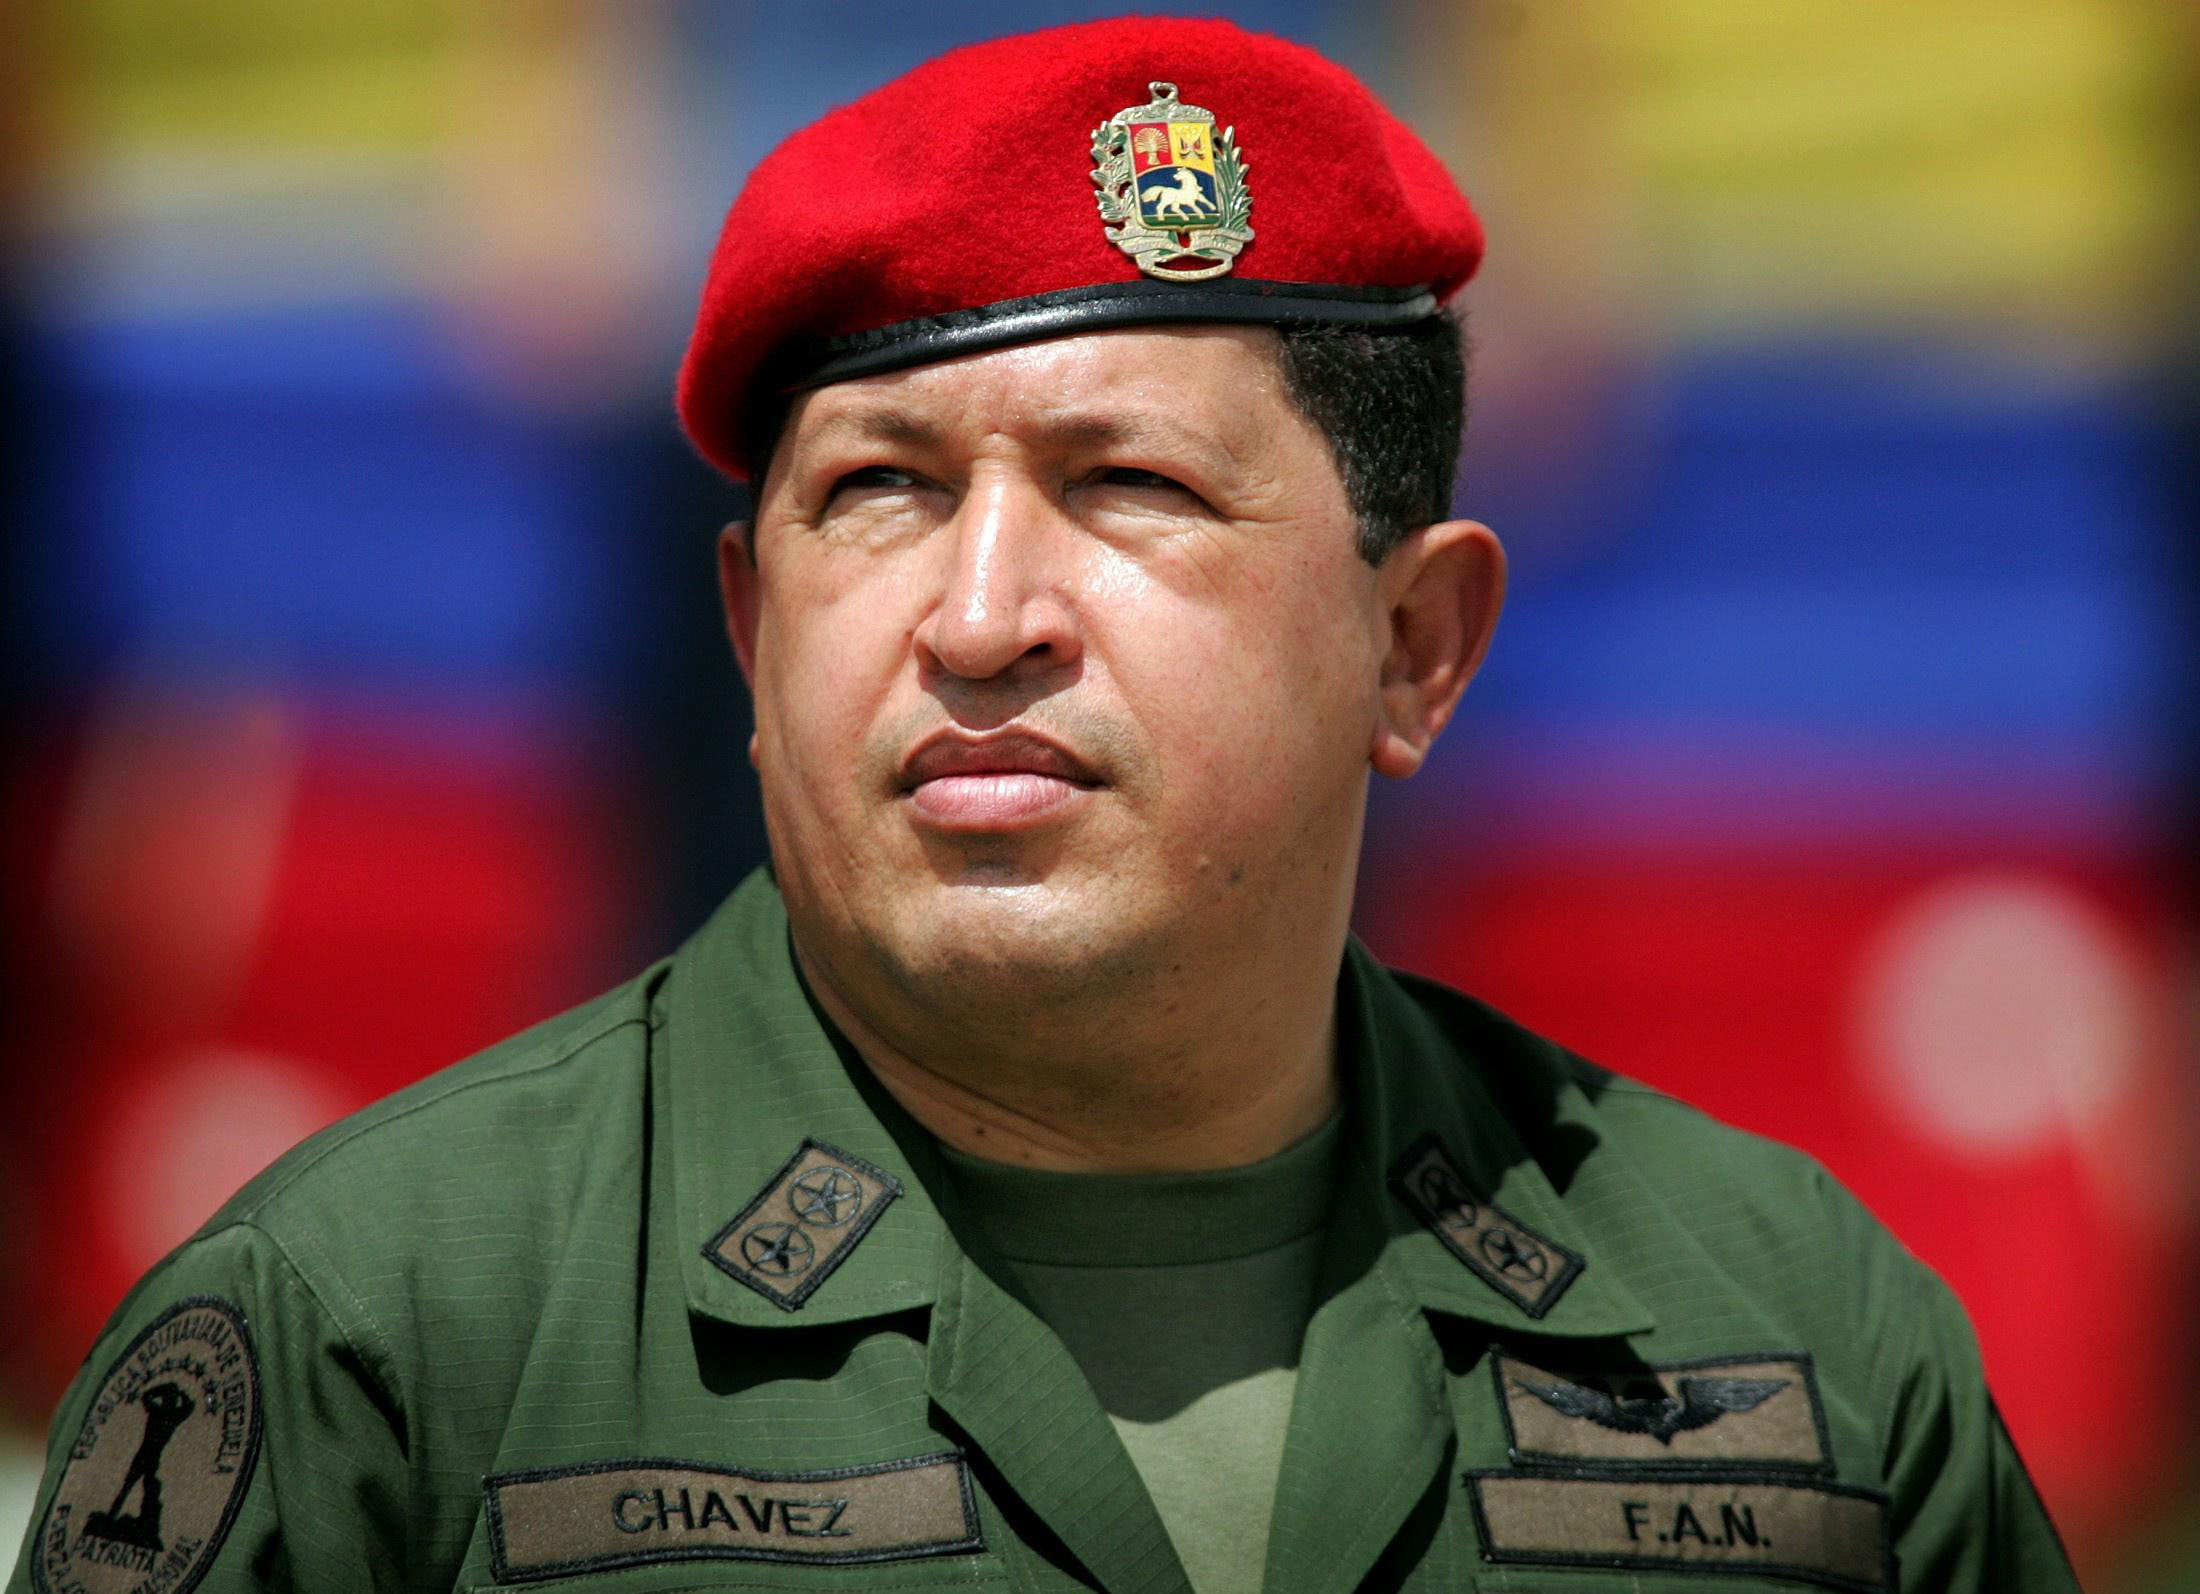 flashback-to-all-the-people-who-praised-chavez-s-socialism